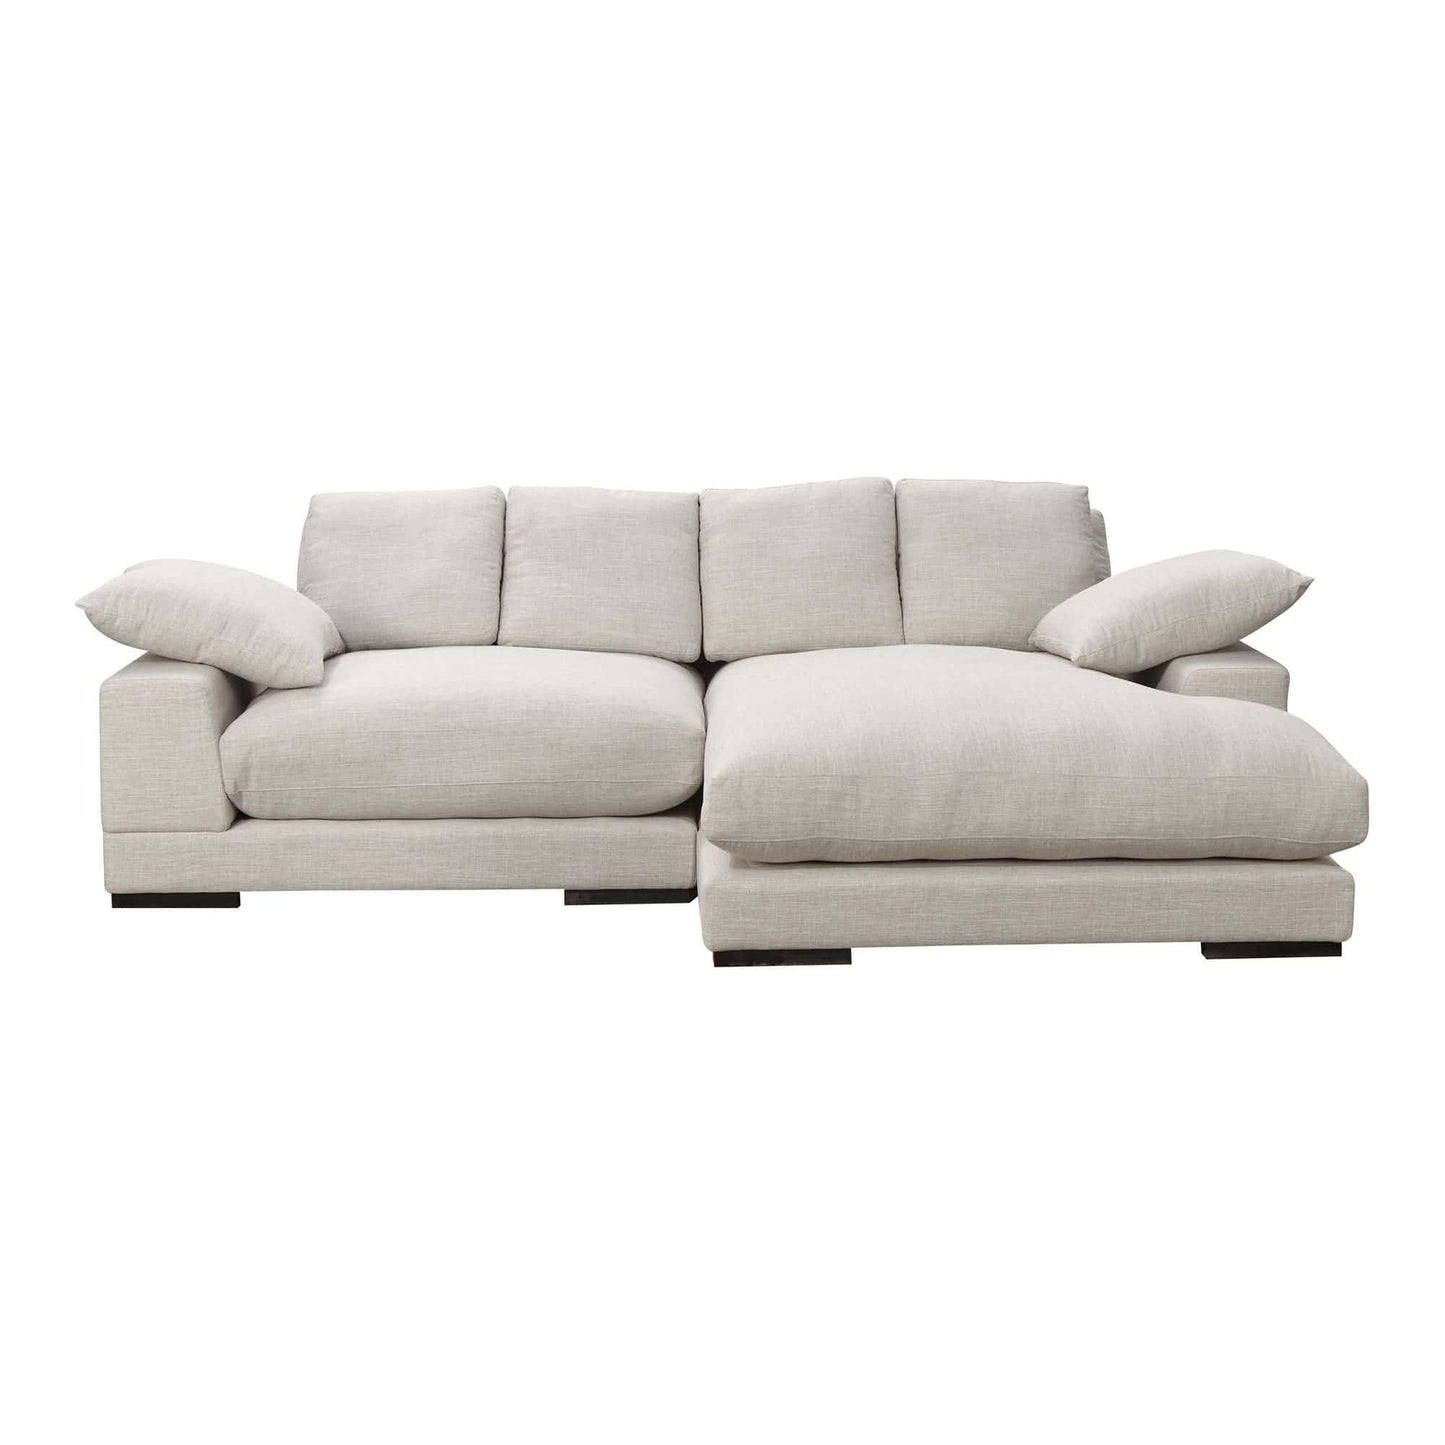 Plunge Sectional in Sahara